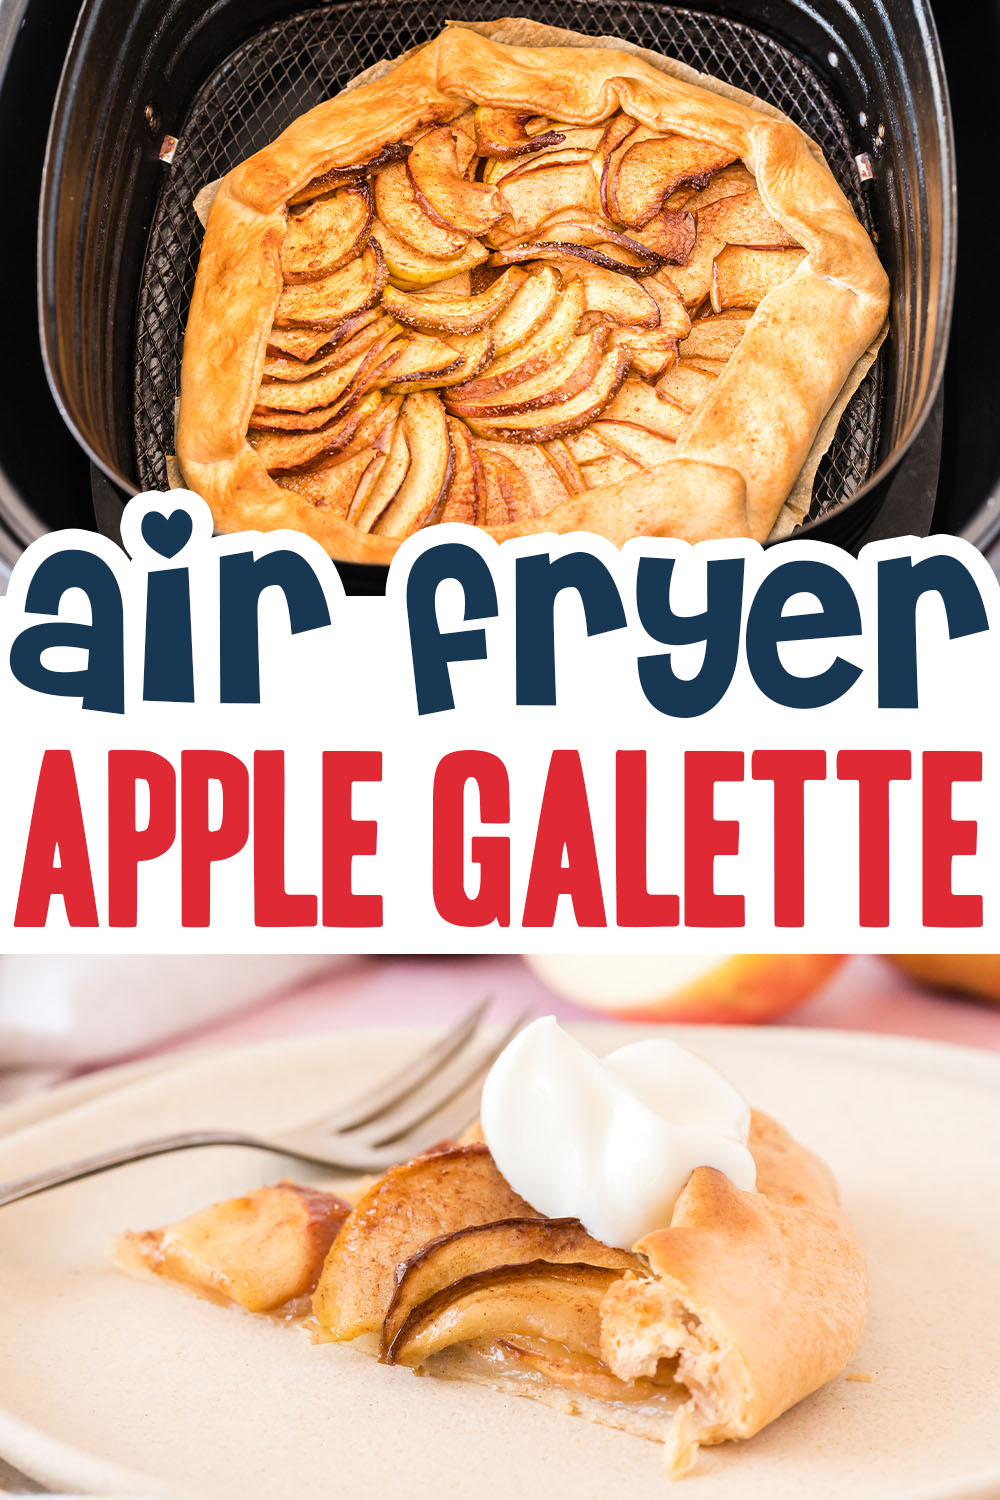 This apple galette is a unique dessert that is really easy to make with your air fryer!